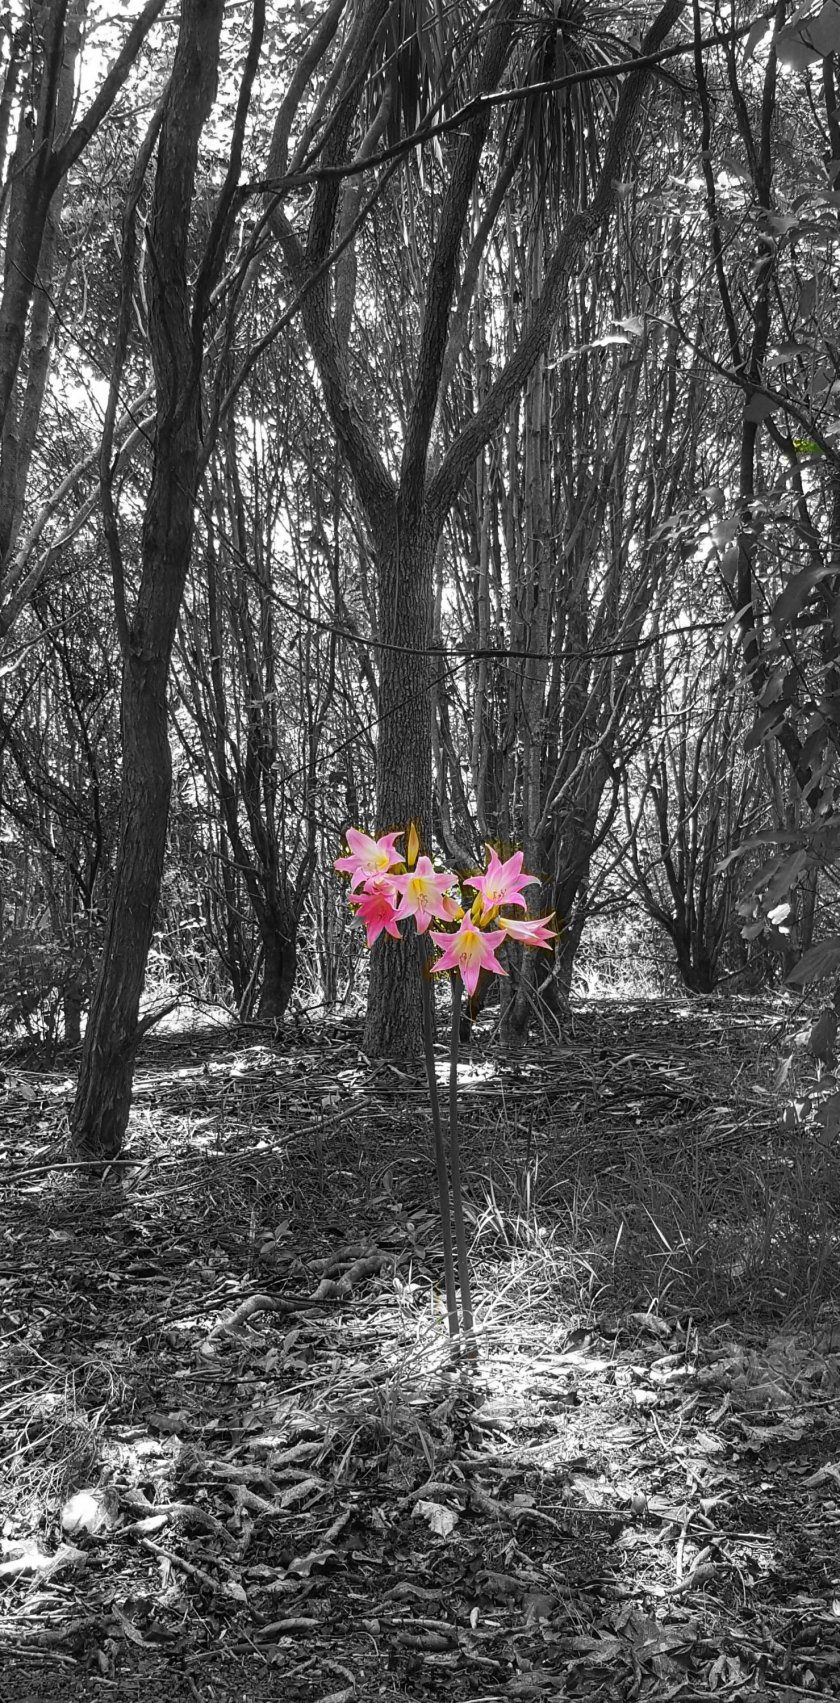 Woodland with dark trees, sun  light shining through on to bright pink flowers in middle of image.